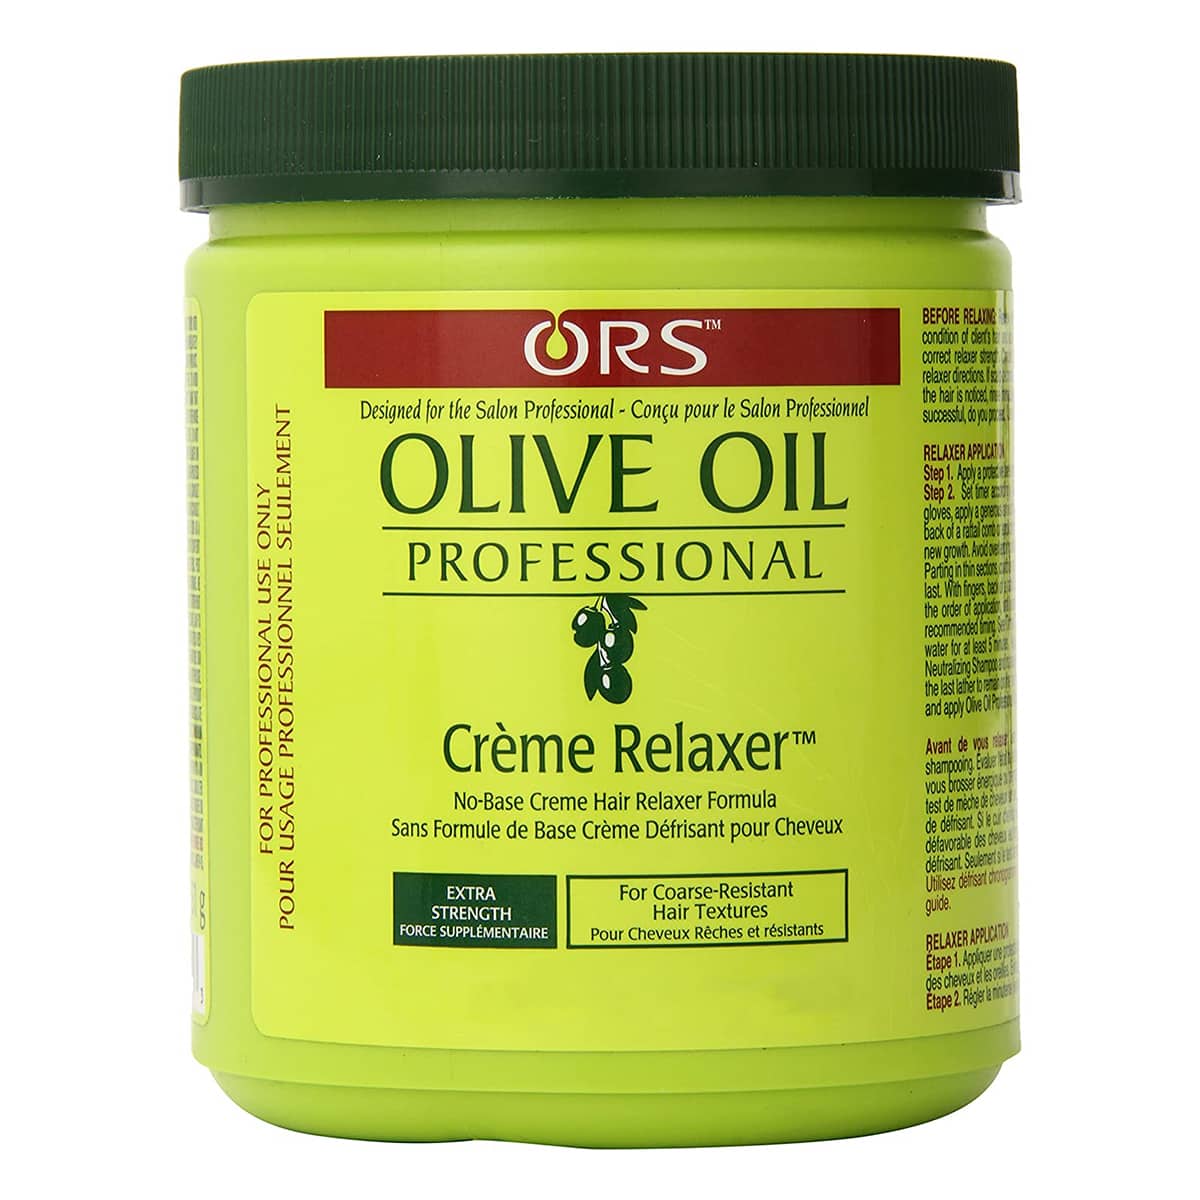 Buy Organic Root Stimulator (ORS) Olive Oil Professional Creme Relaxer Kit (Extra Strength)